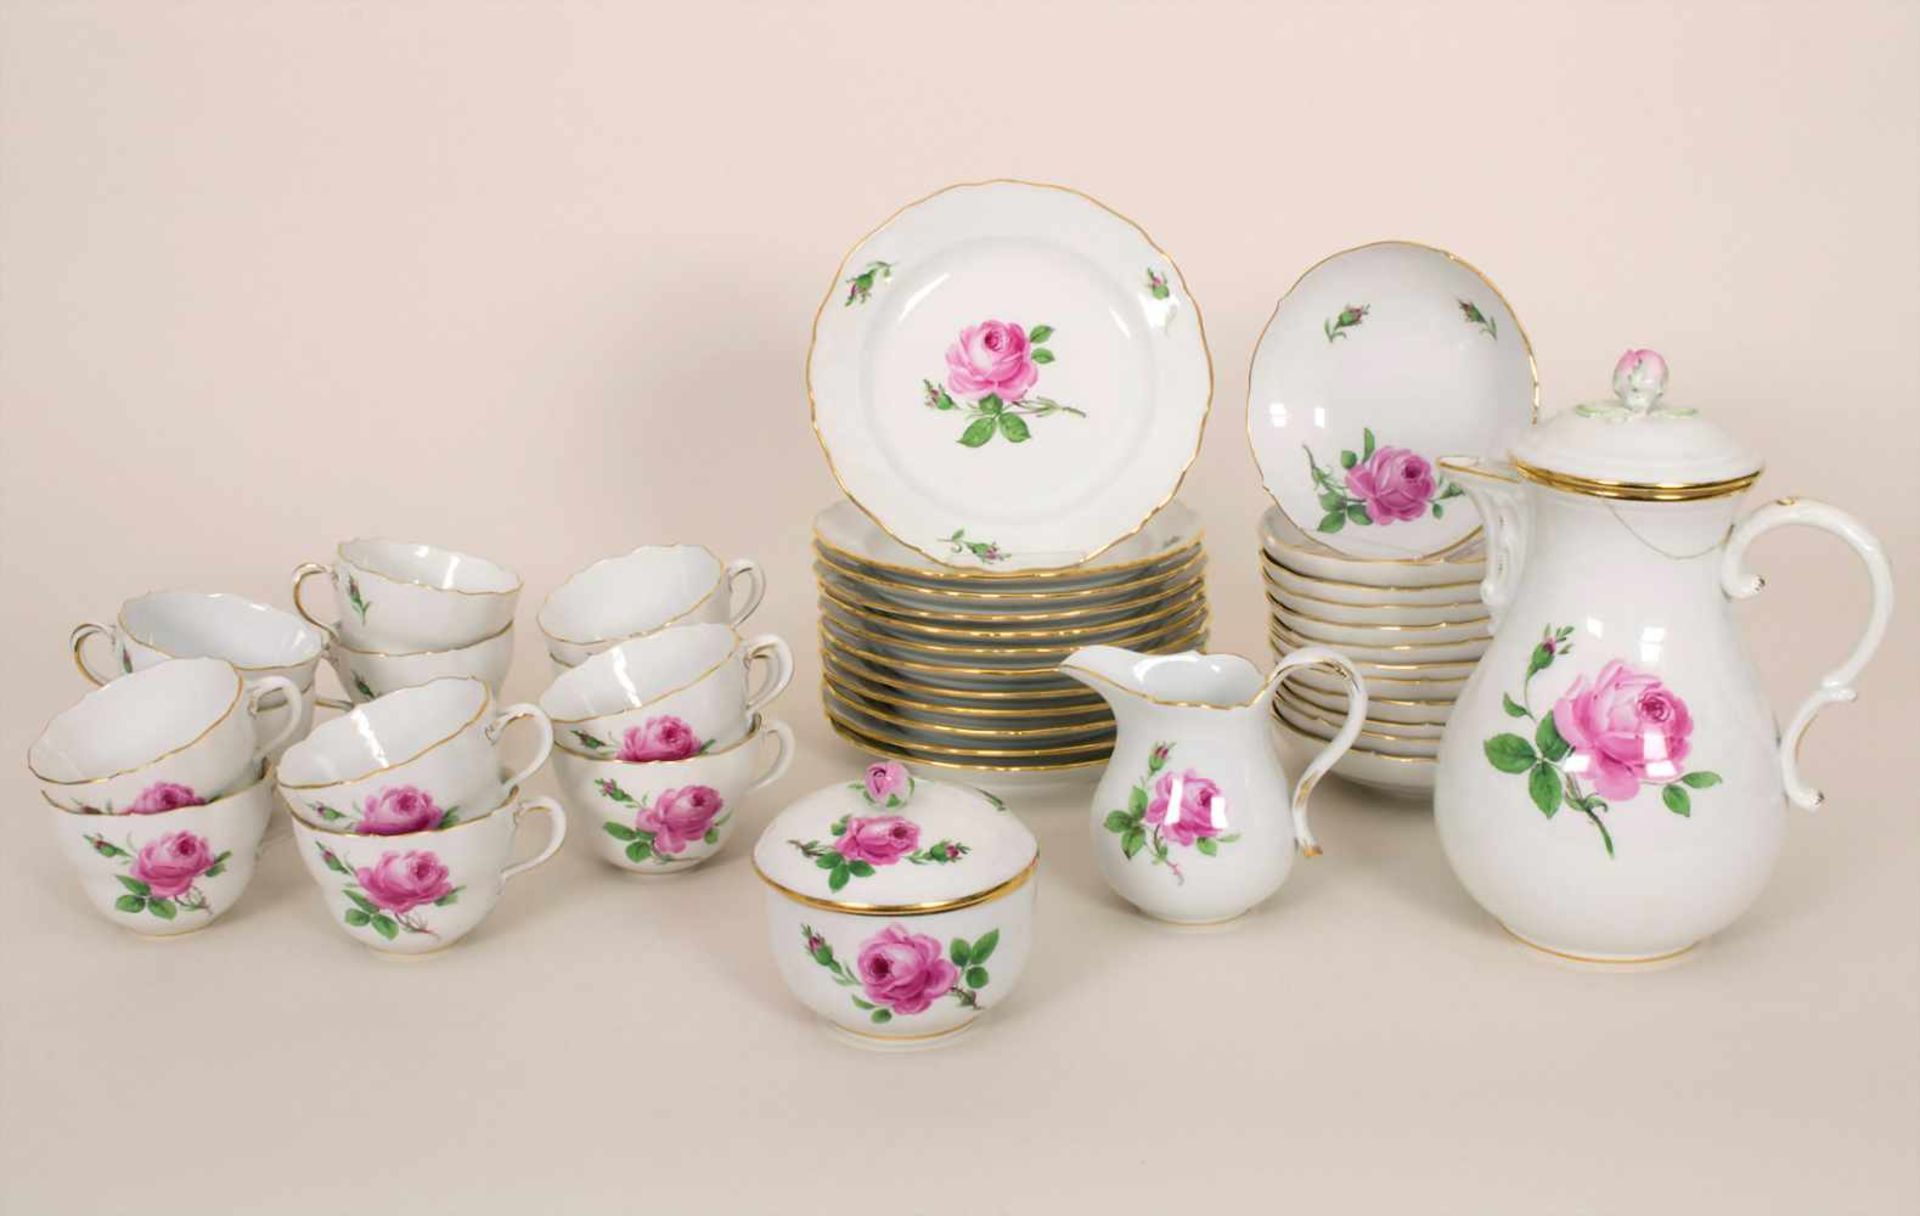 Kaffeeservice 'Rote Rose' für 12 Personen / A coffee set 'Red Rose' for 12 persons, Meissen, 1924-